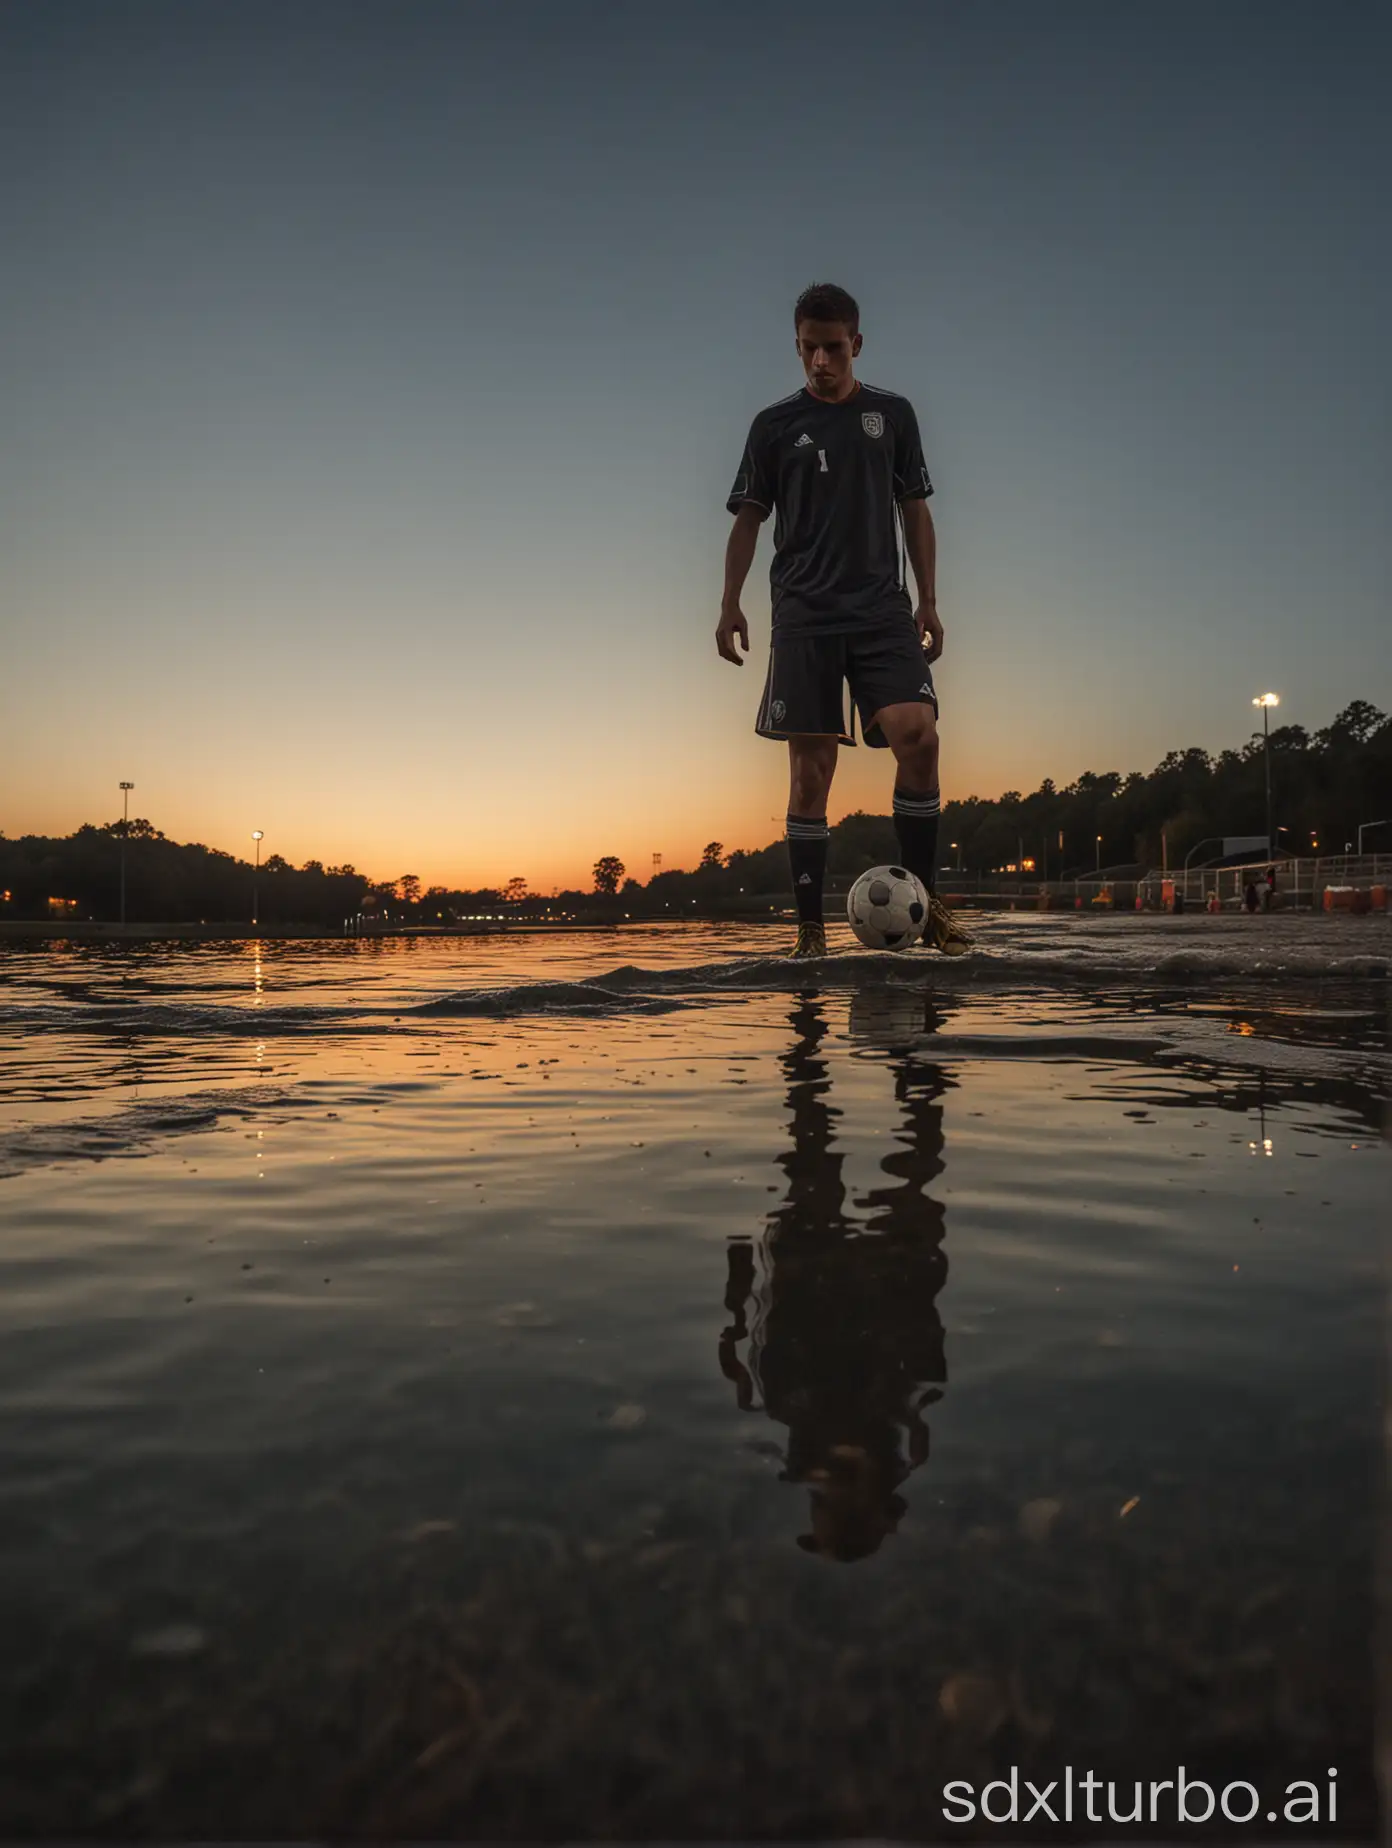 Lonely-Soccer-Player-Contemplating-at-Dusk-with-Water-Reflection